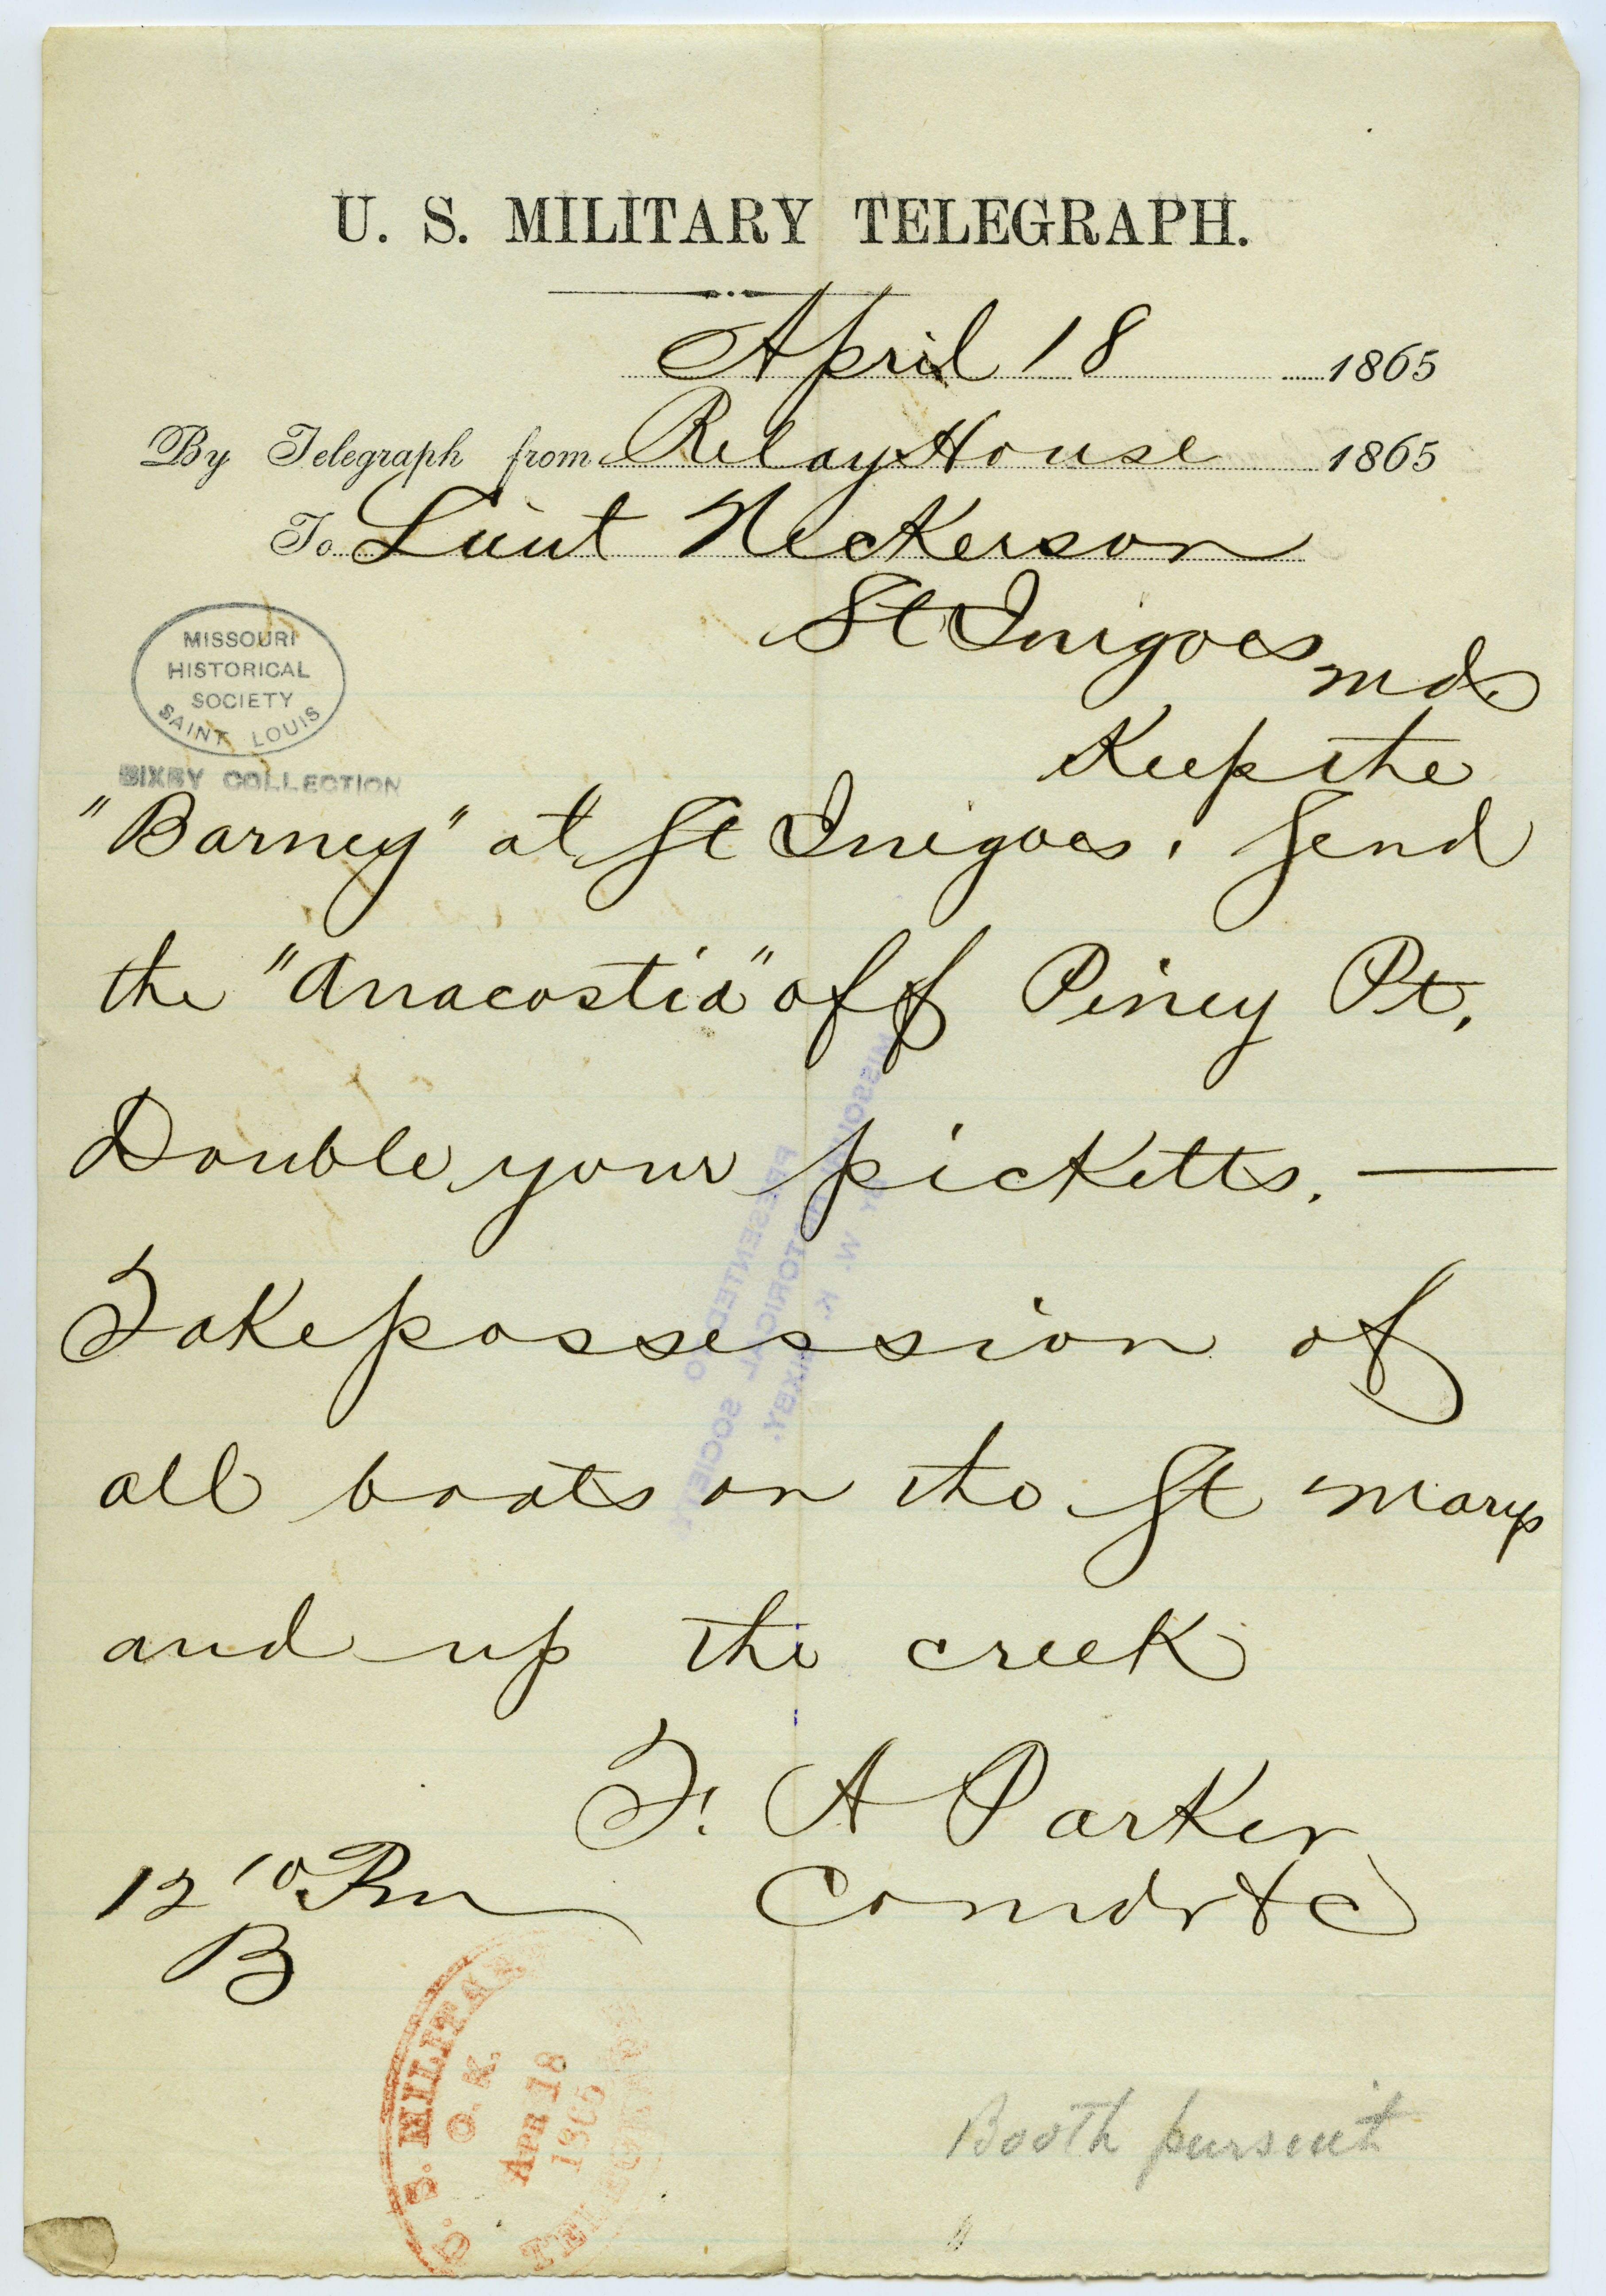 U.S. Military Telegraph of F.A. Parker, Relay House, to Lieut. Nickerson [S. Nickerson], St. Inigoes, Md., April 18, 1865